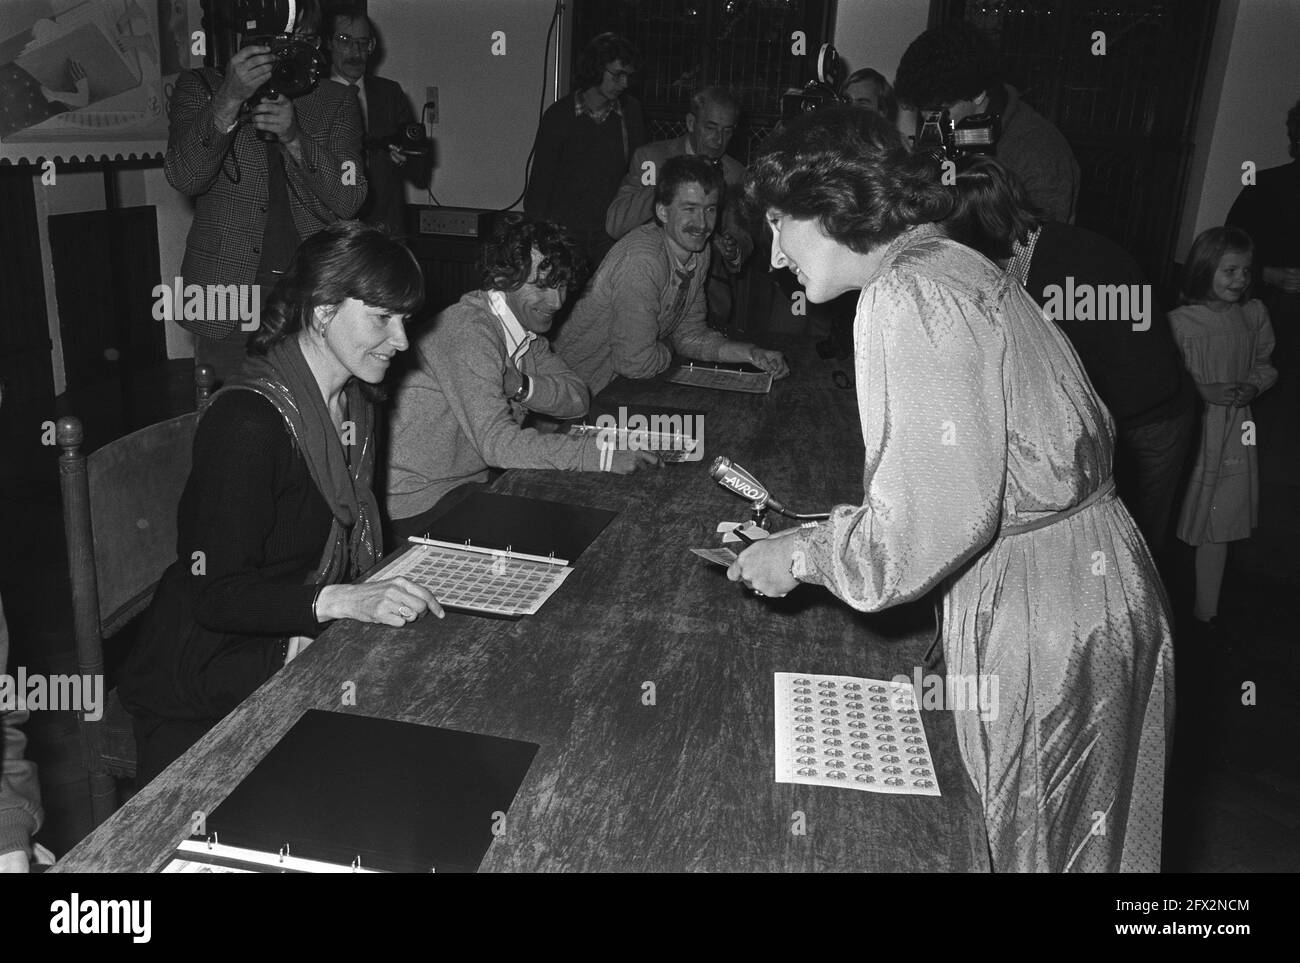 Margriet made first purchase of children's postage stamps 1980 in The Hague, Princess Margriet buying stamps at table, November 11, 1980, KINDERPOSTZEGELS, purchase, tables, The Netherlands, 20th century press agency photo, news to remember, documentary, historic photography 1945-1990, visual stories, human history of the Twentieth Century, capturing moments in time Stock Photo